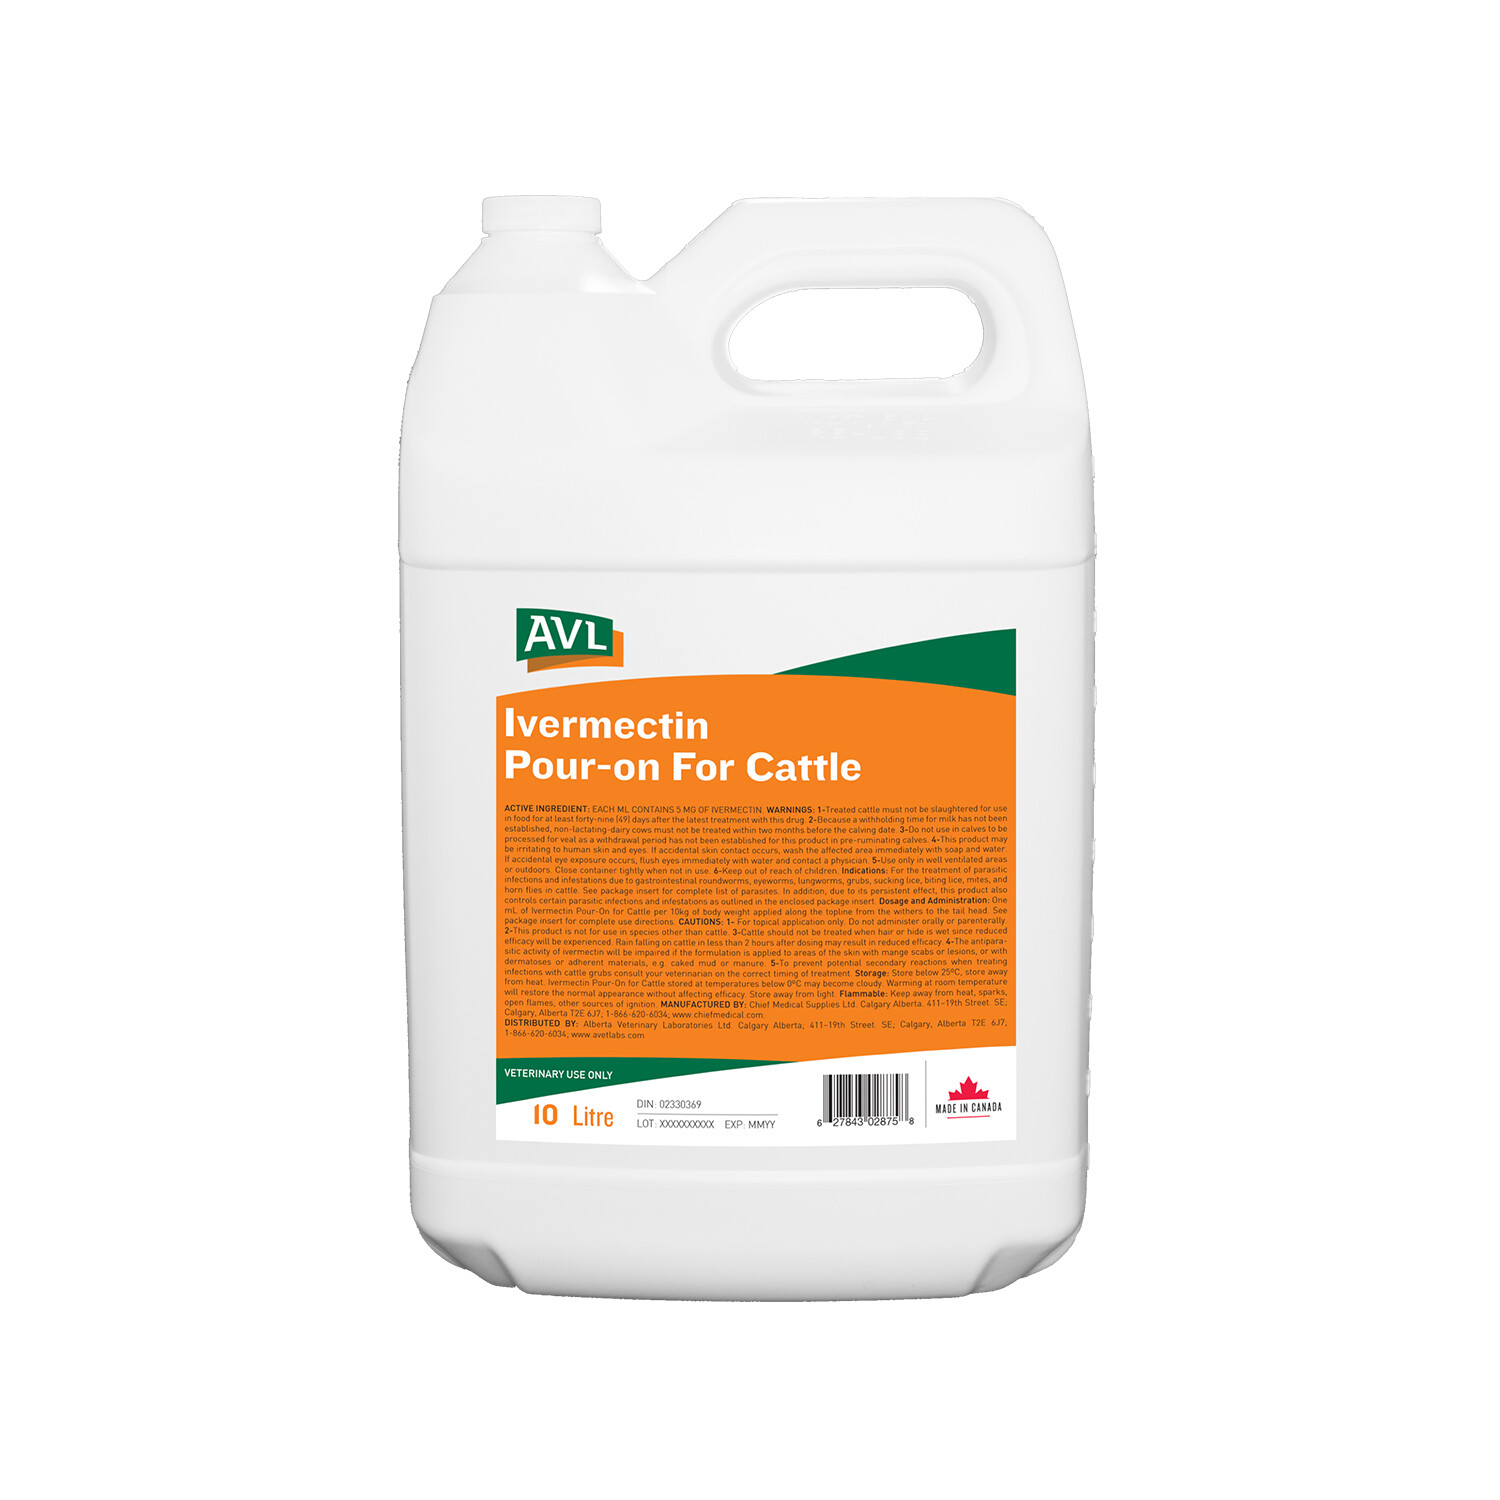 Ivermectin Pour on for Cattle